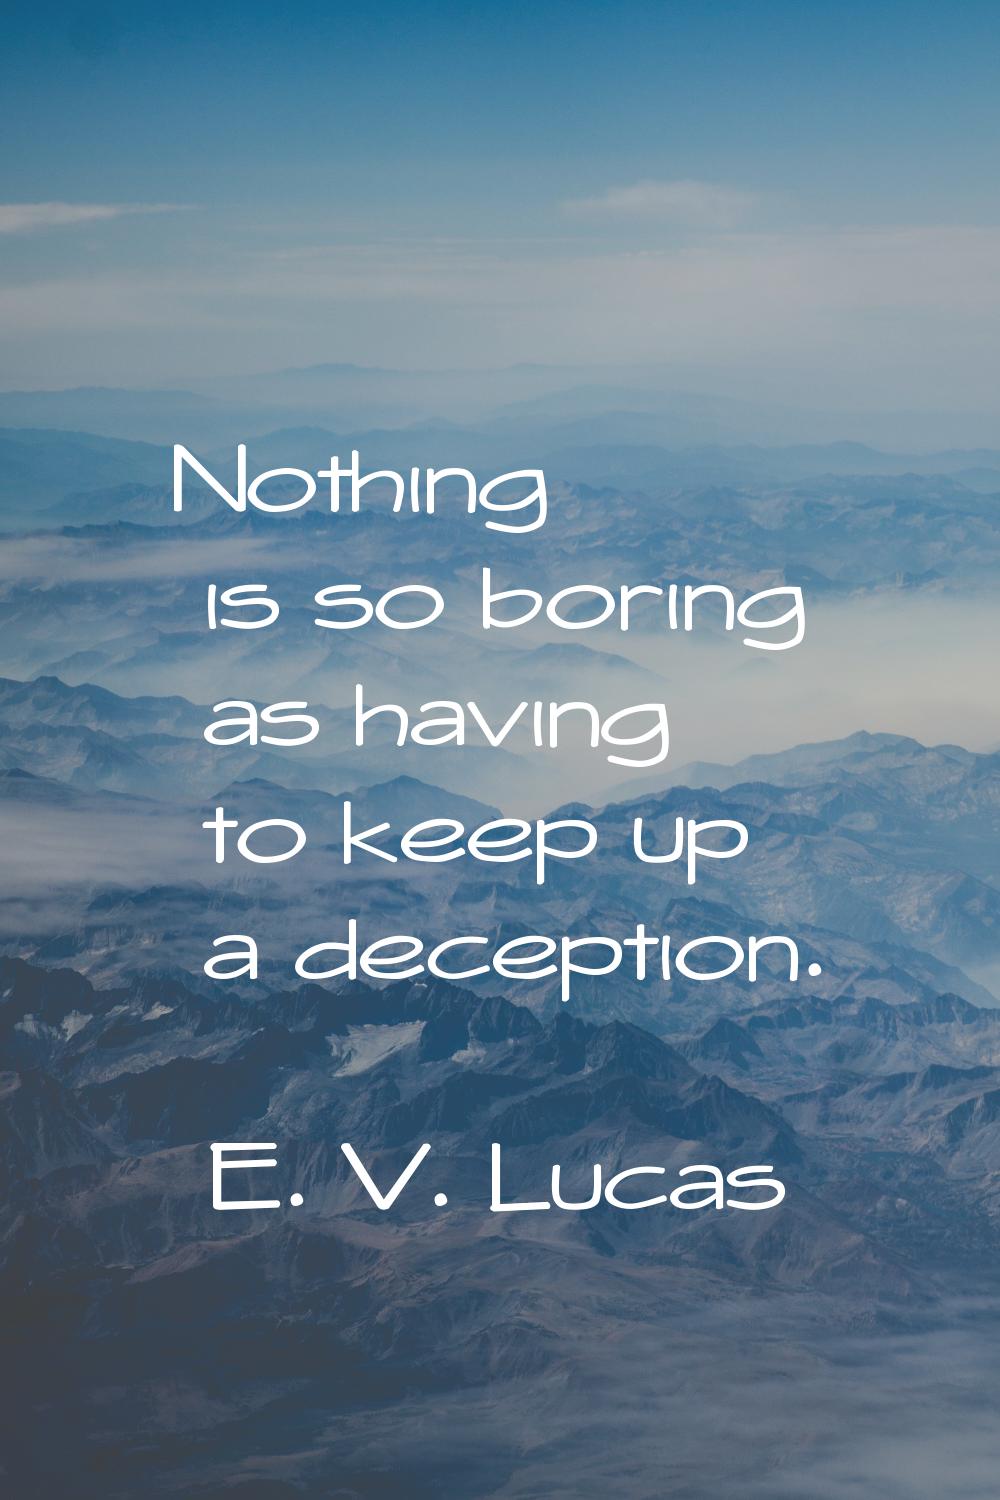 Nothing is so boring as having to keep up a deception.